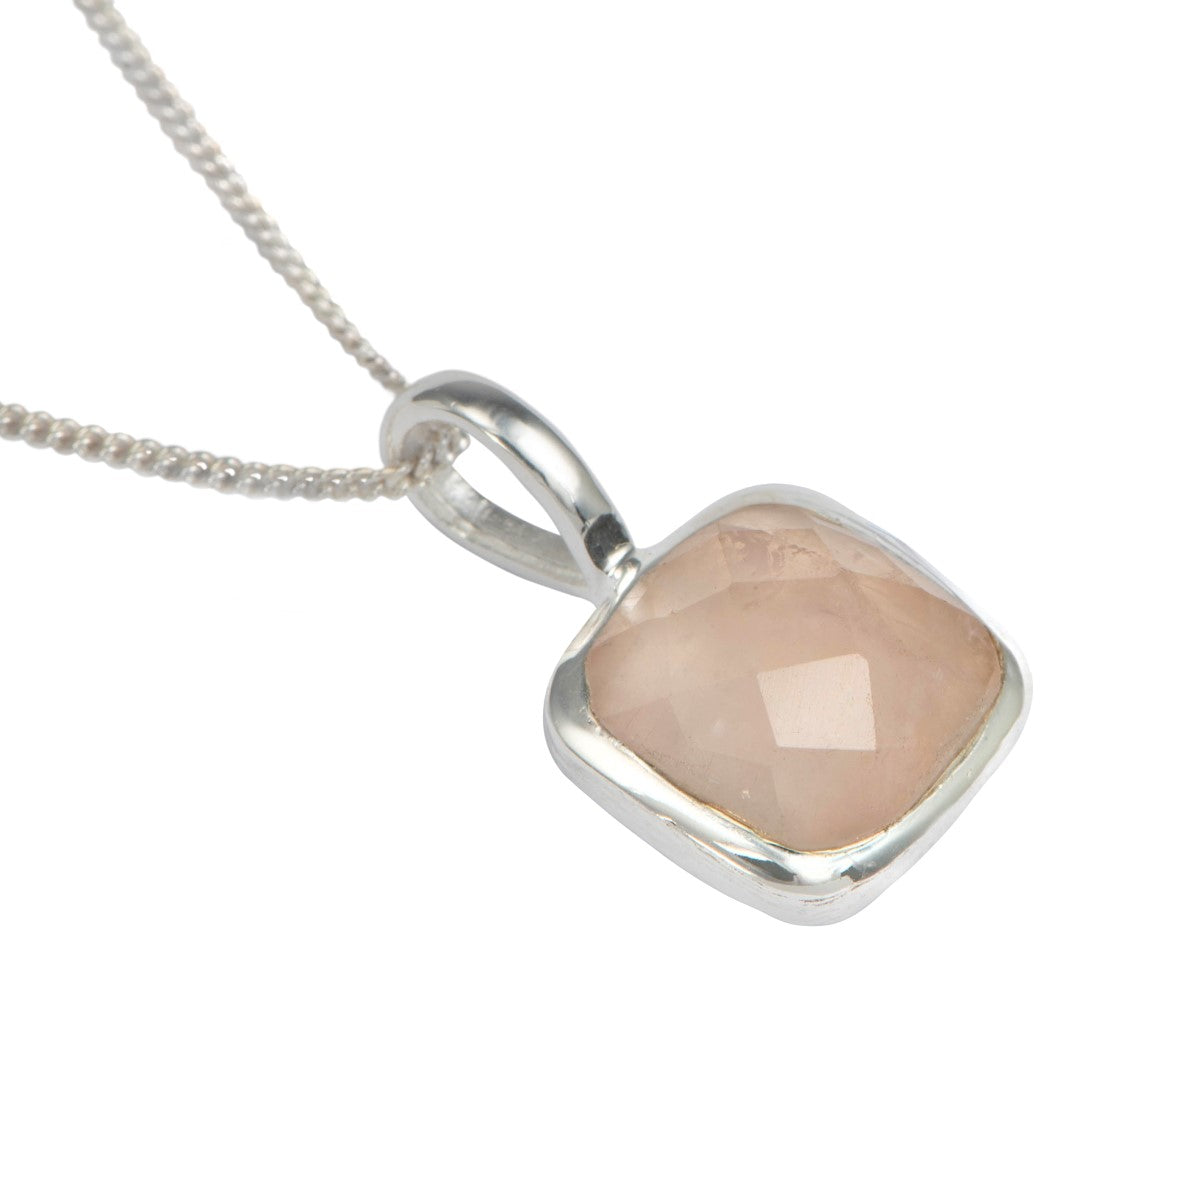 Sterling Silver Pendant Necklace with a Faceted Square Gemstone - Rose Quartz